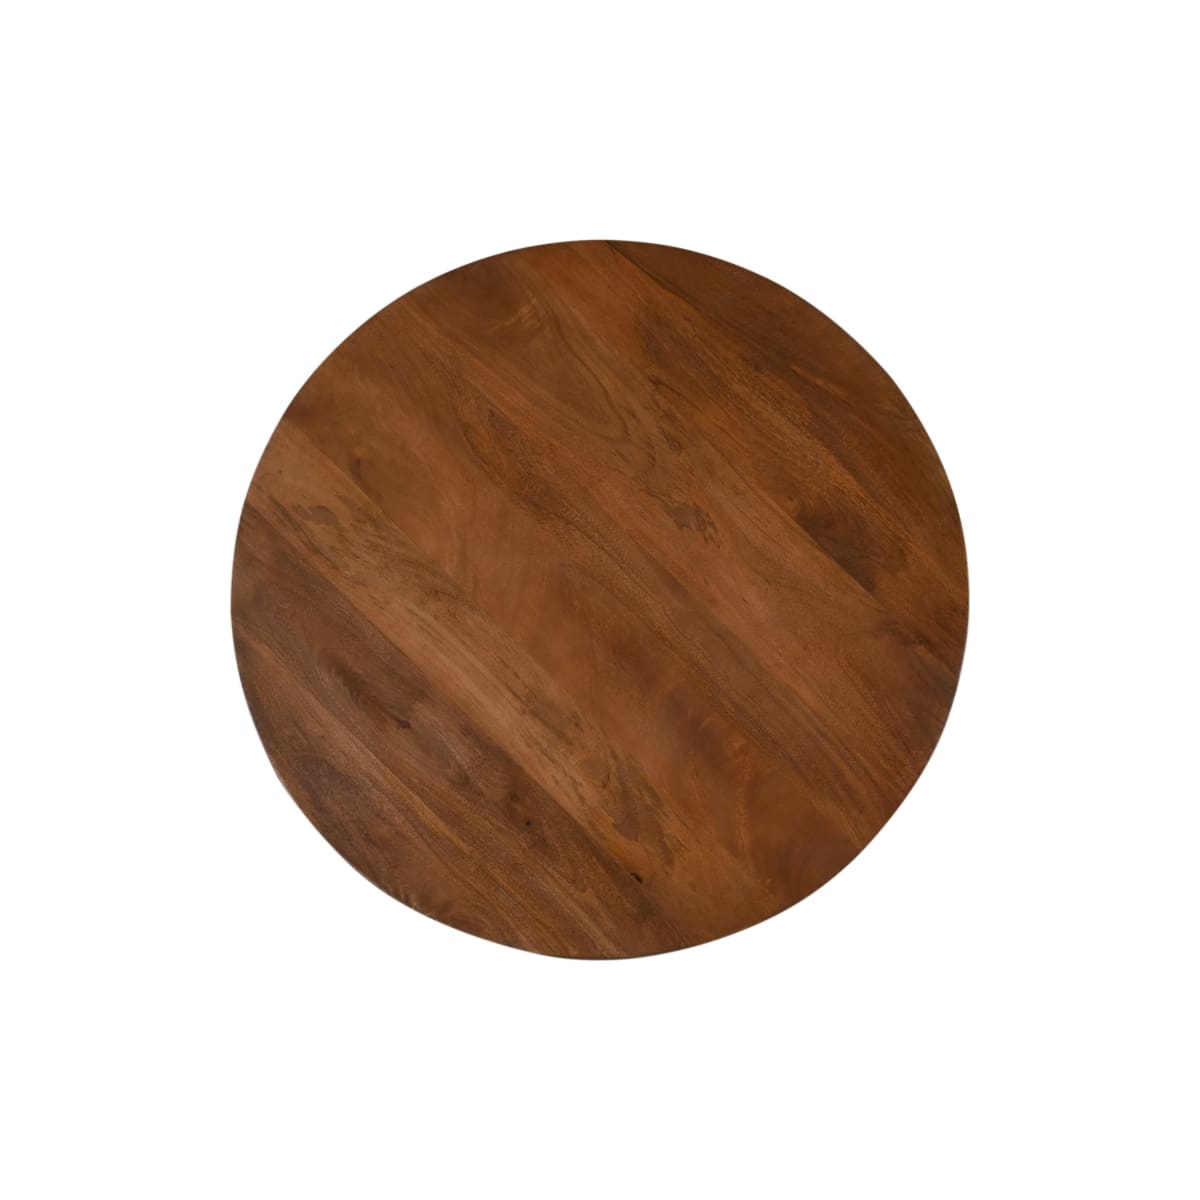 Durango Coffee Table | Solid Wood - coffee-tables